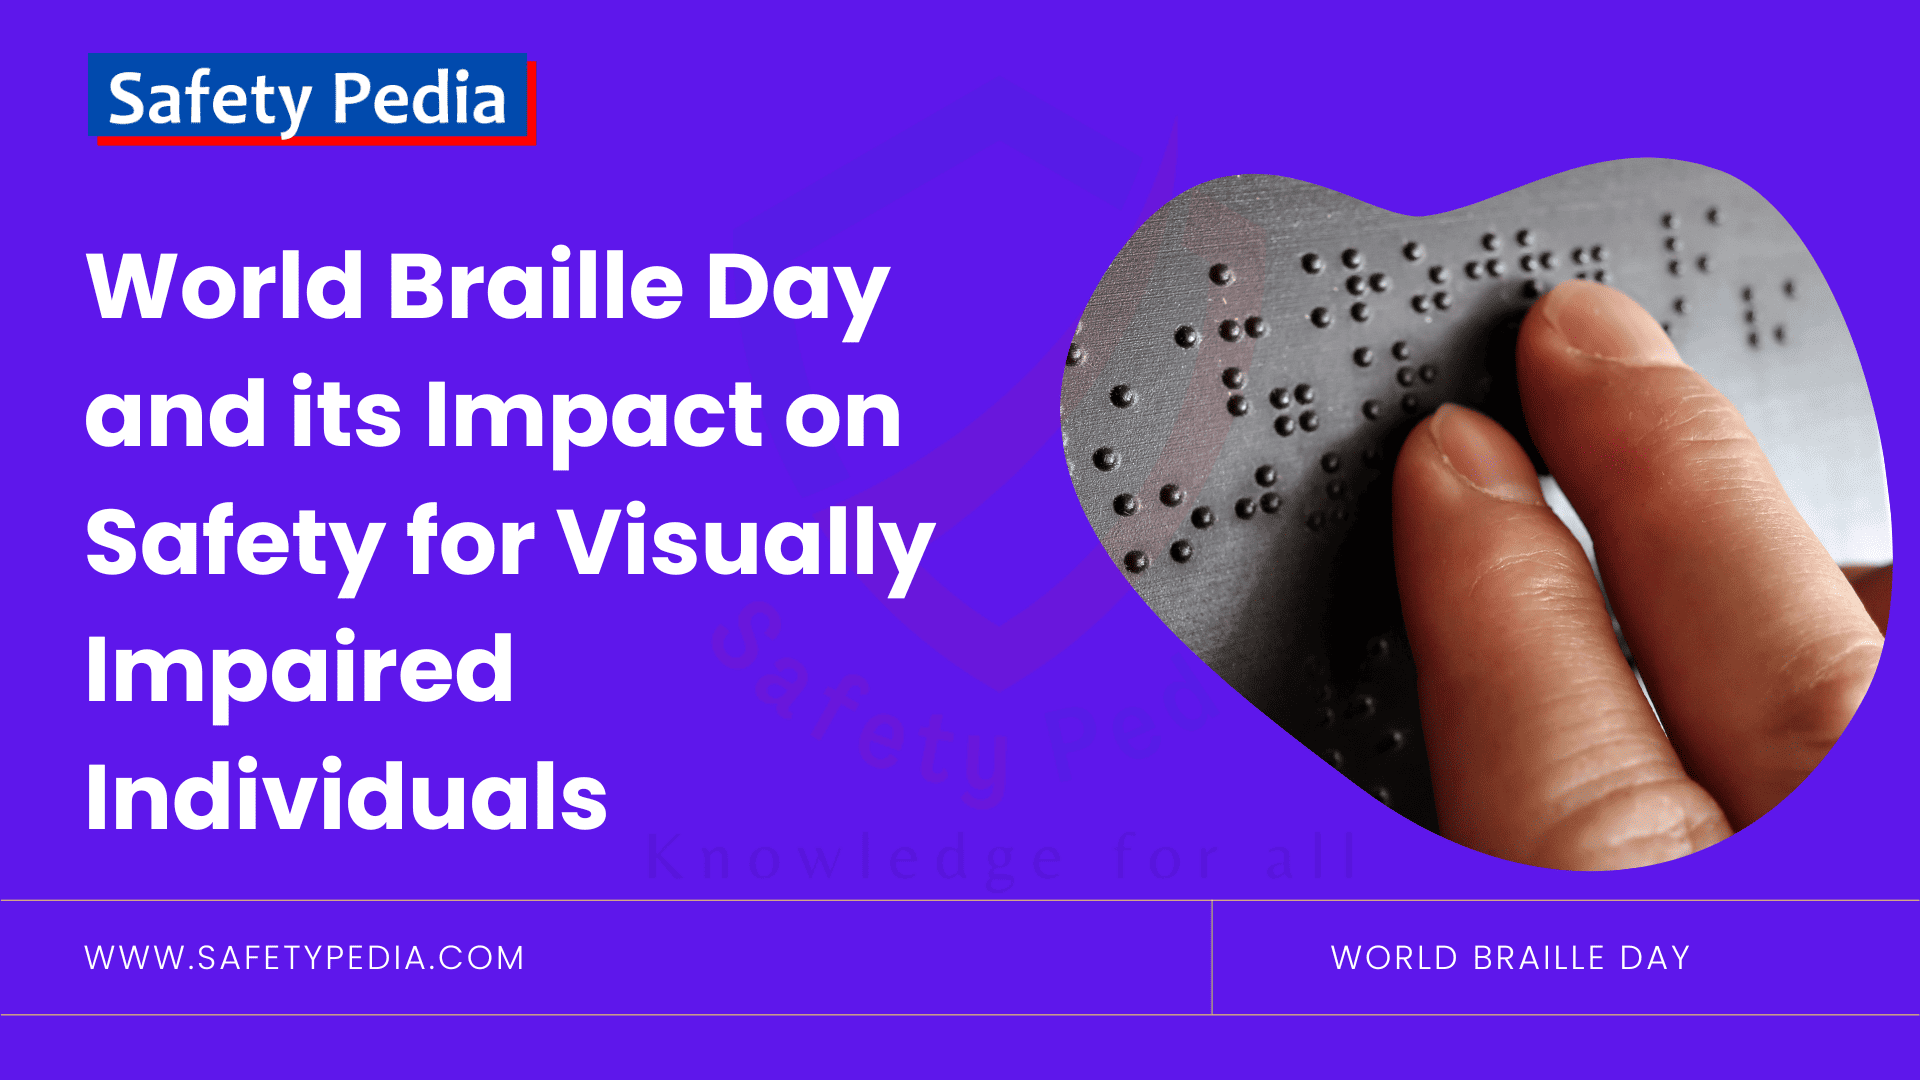 World-Braille-Day-and-its-Impact-on-Safety-for-Visually-Impaired-Individuals tactile languages and fingers on it